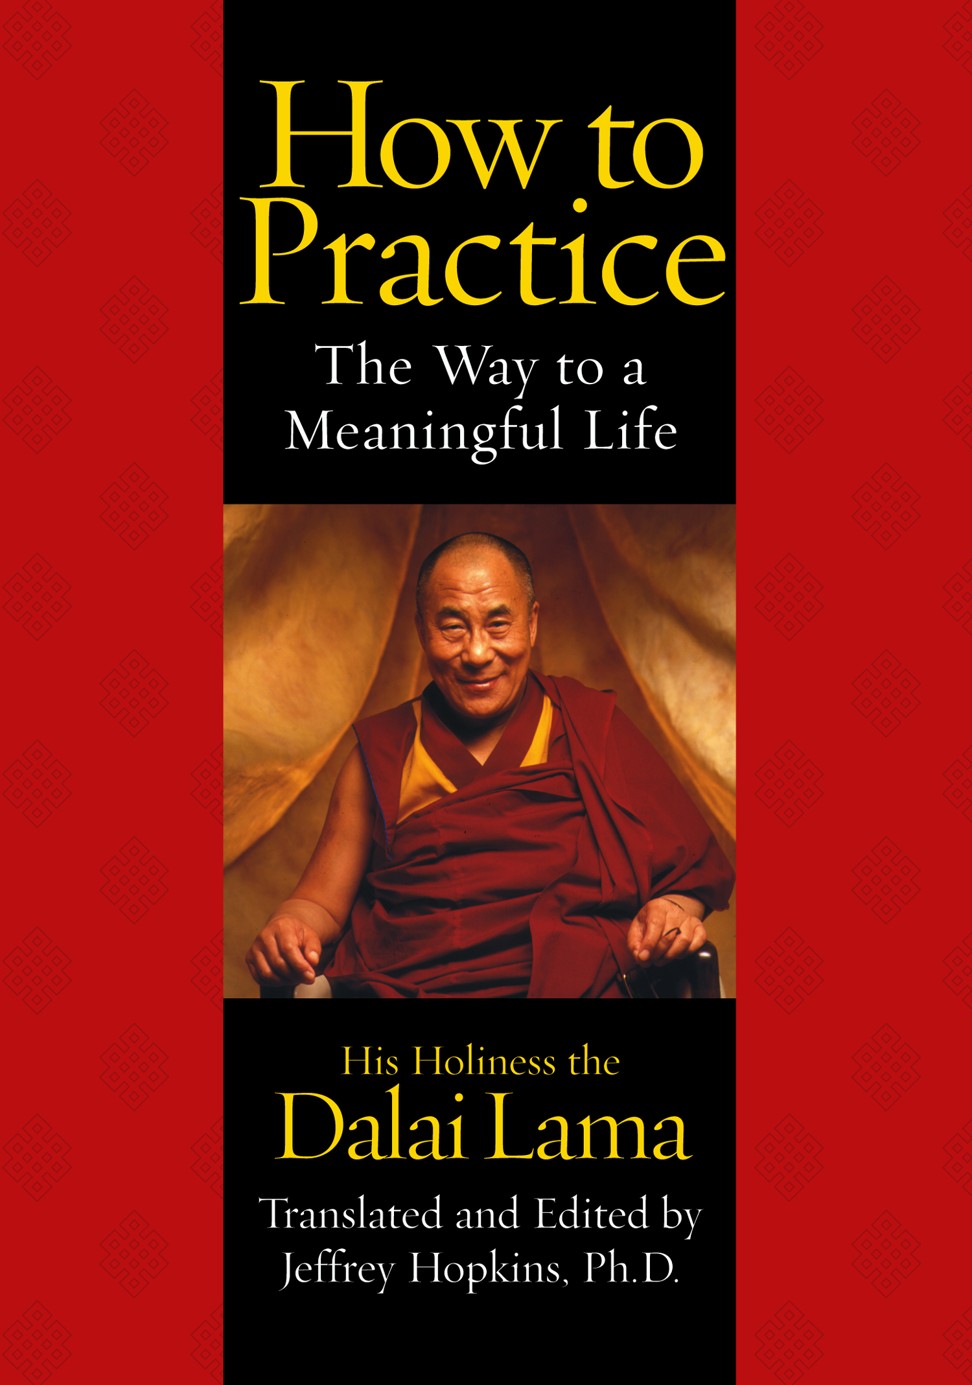 How to Practice: The Way to a Meaningful Life by the Dalai Lama.